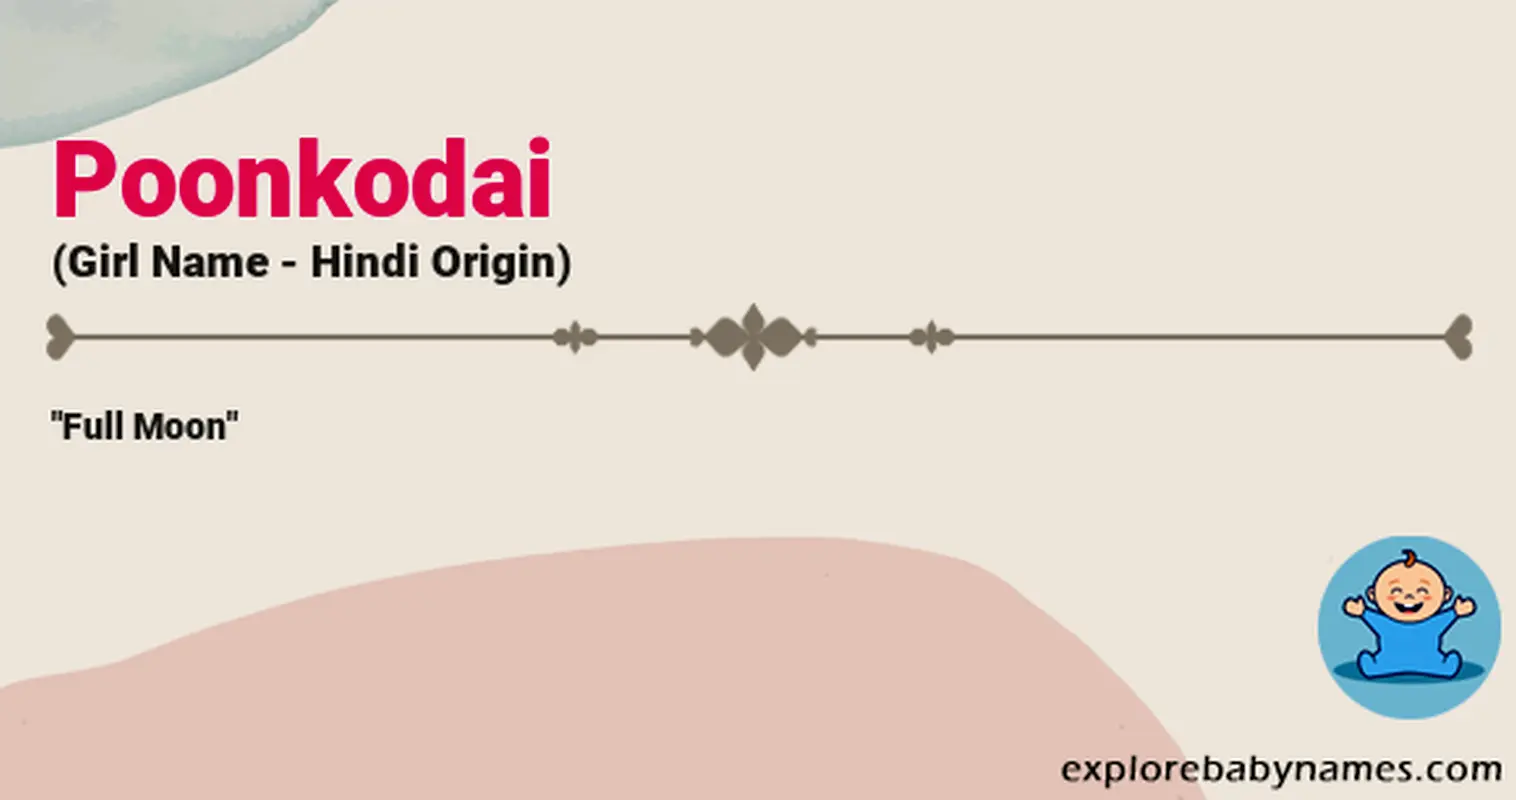 Meaning of Poonkodai